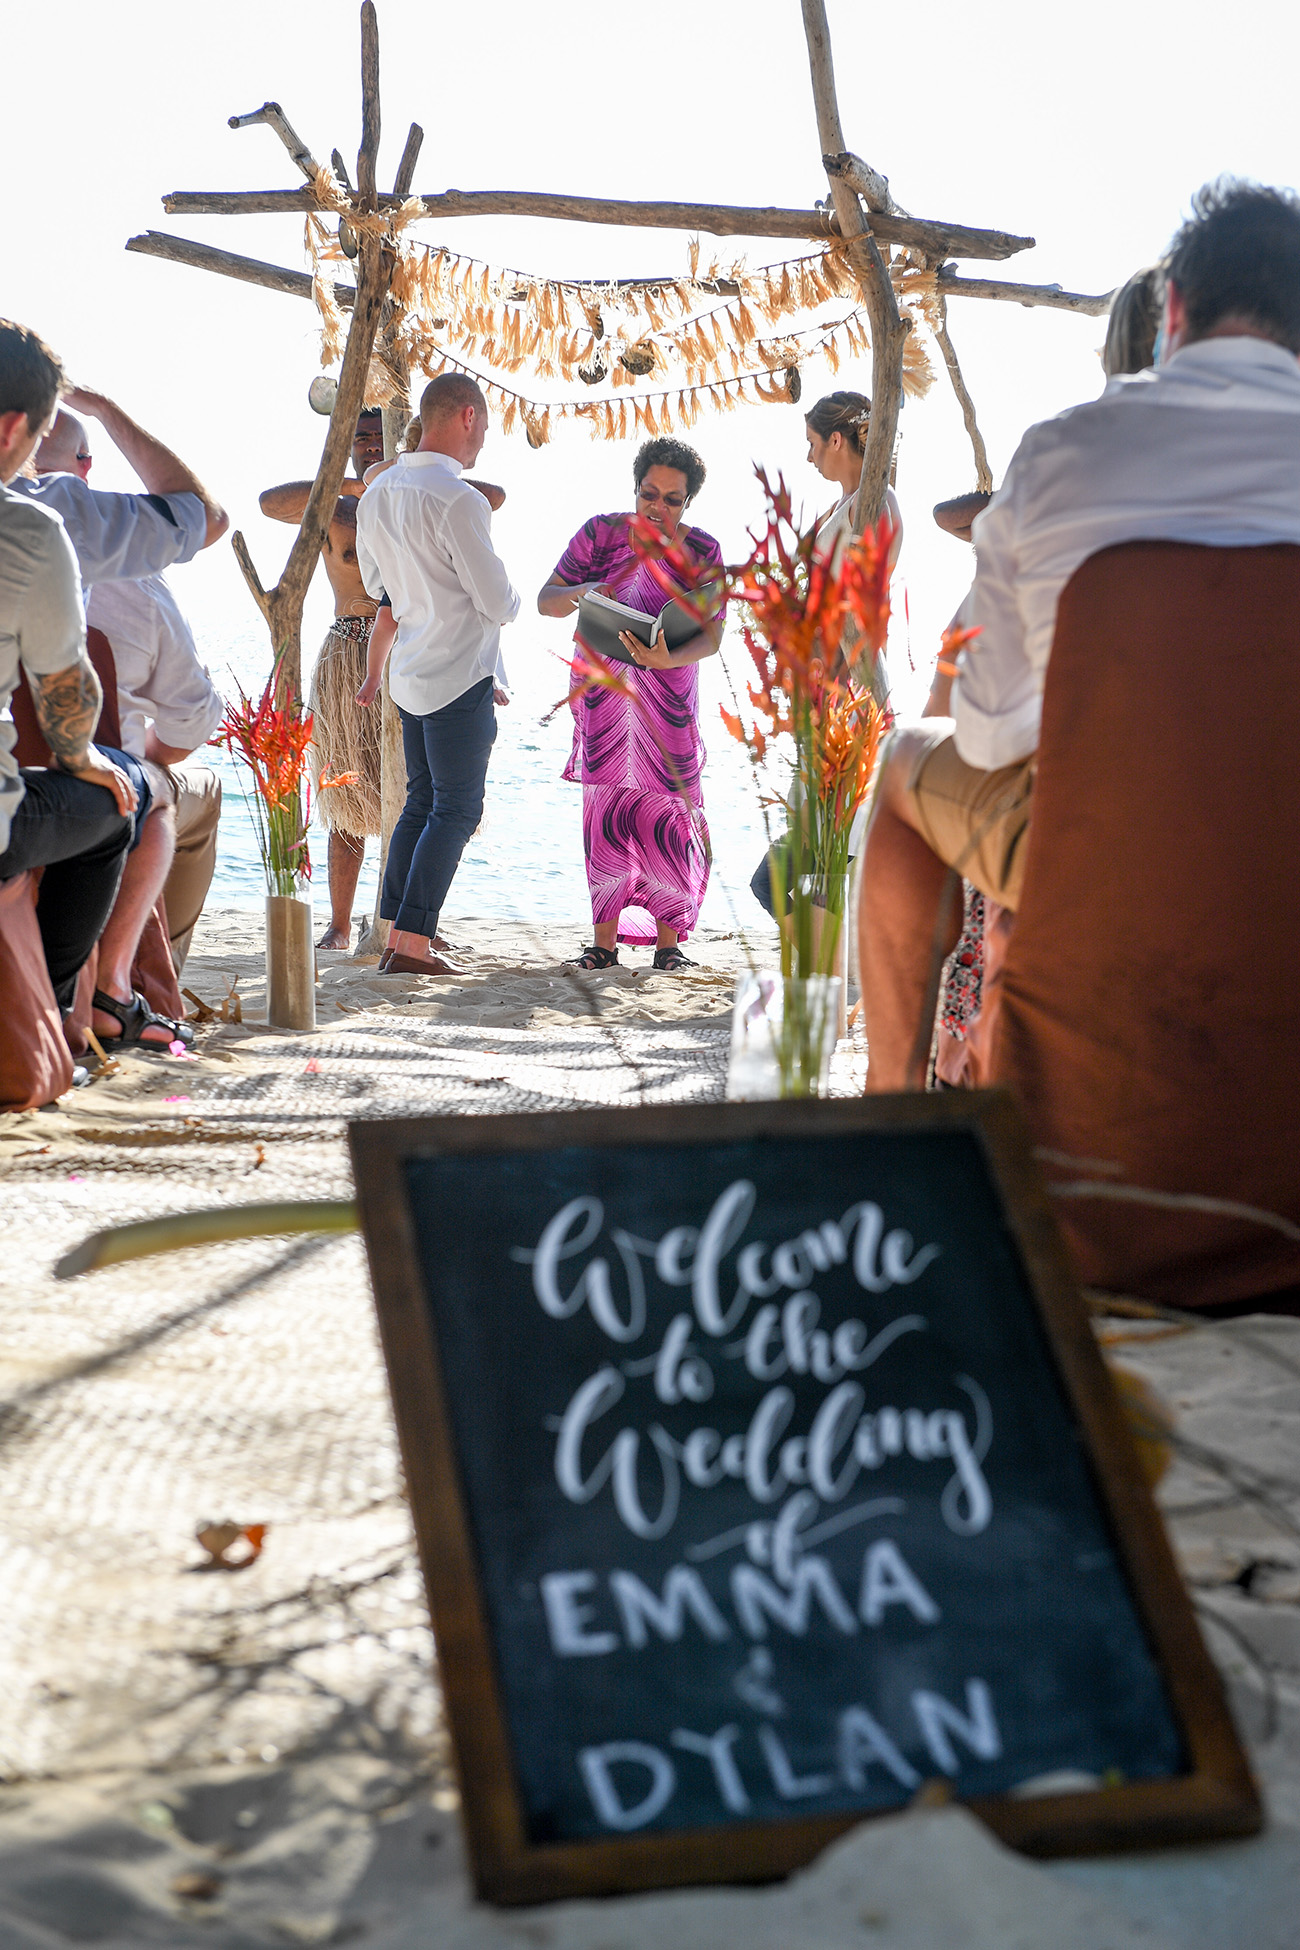 Emma & Dylan ceremony with a welcome chalkboard placard at the wedding ceremony venue.